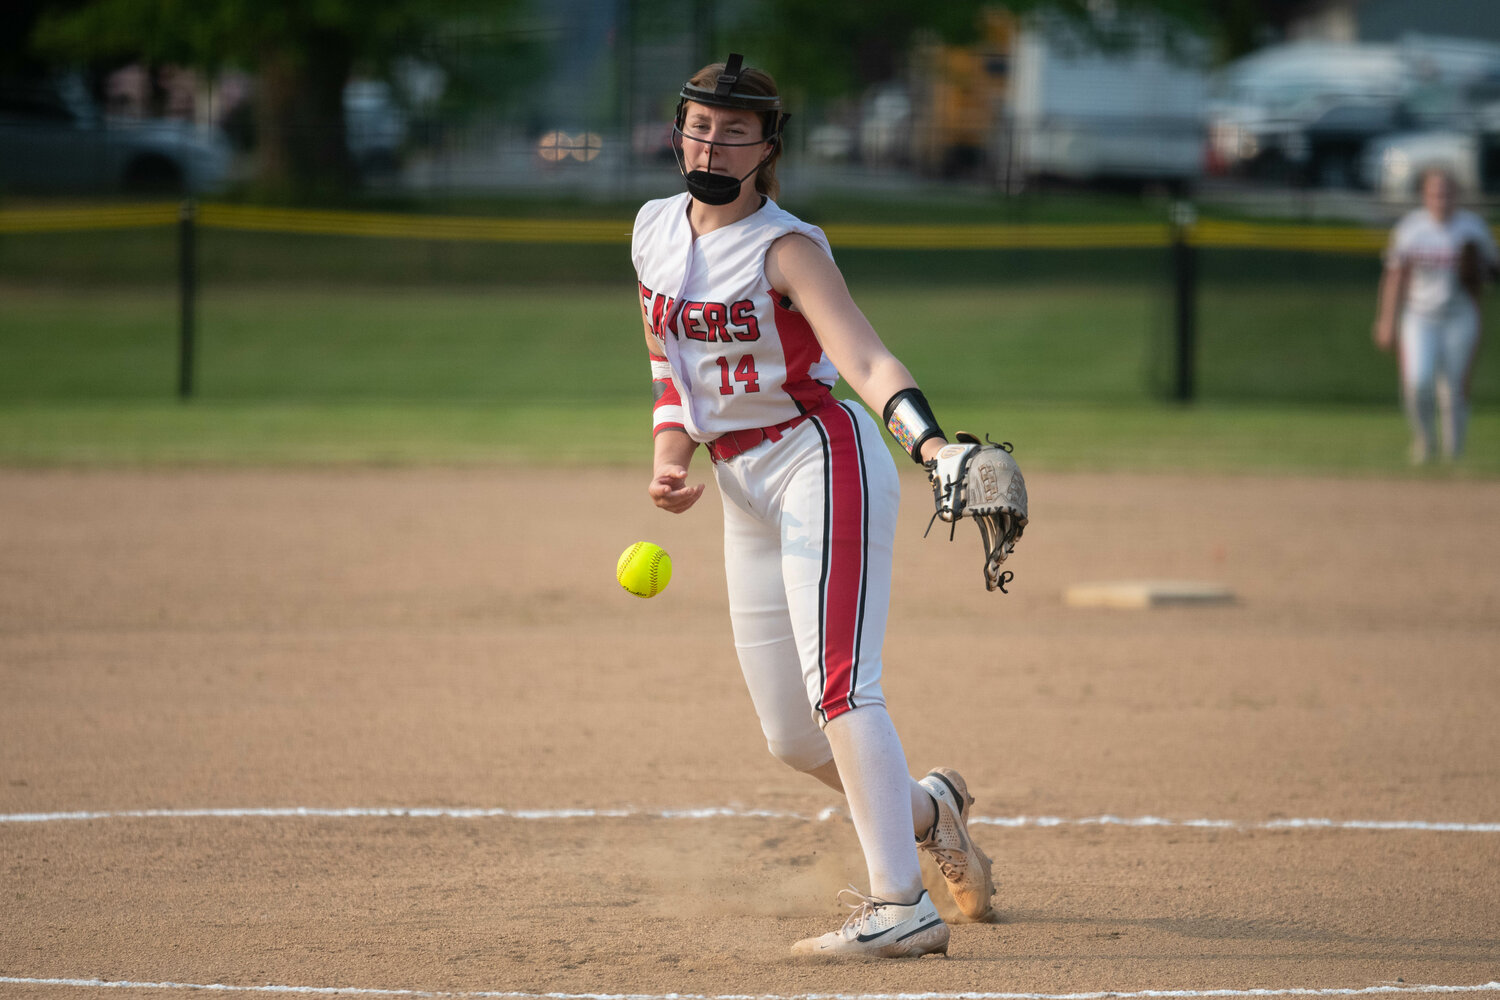 Chloe Grayless throws a pitch during Tenino's 11-1 loss to Seton Catholic in a loser-out game at the 1A Distrct 4 tournament, May 17 at Fort Borst Park.